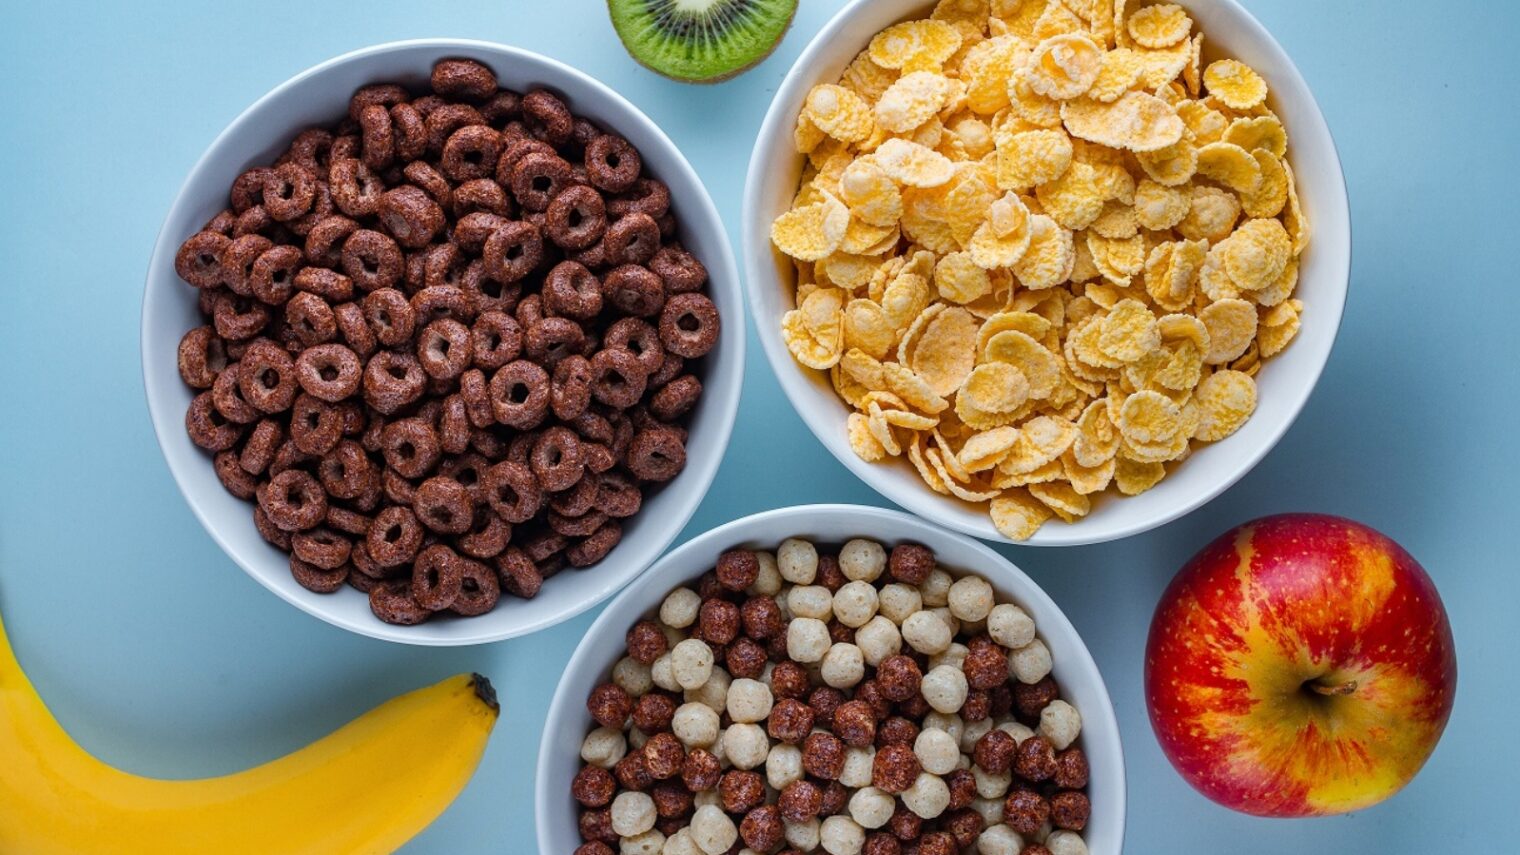 Fruitlift offers a fruity way for cereal makers to eliminate or reduce refined white sugar in their products. Photo: courtesy